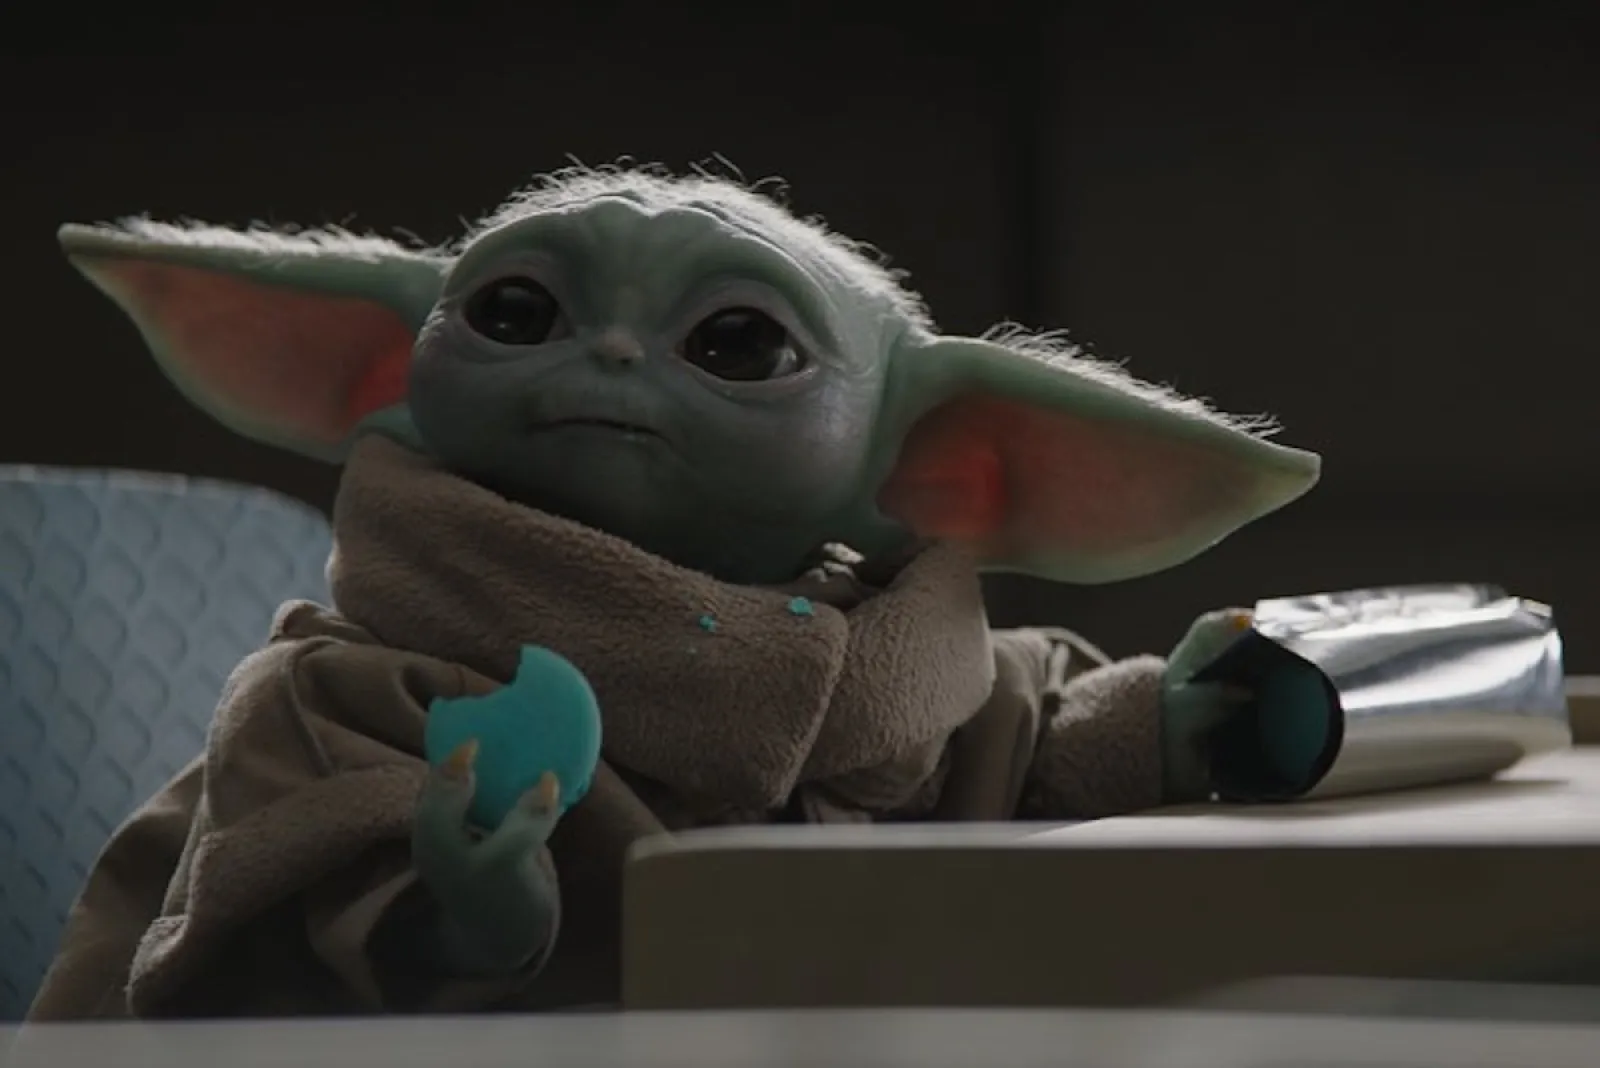 baby yoda cookie